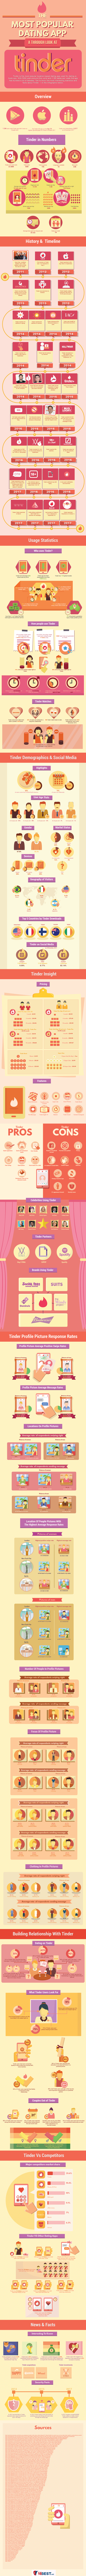 infographic on Tinder